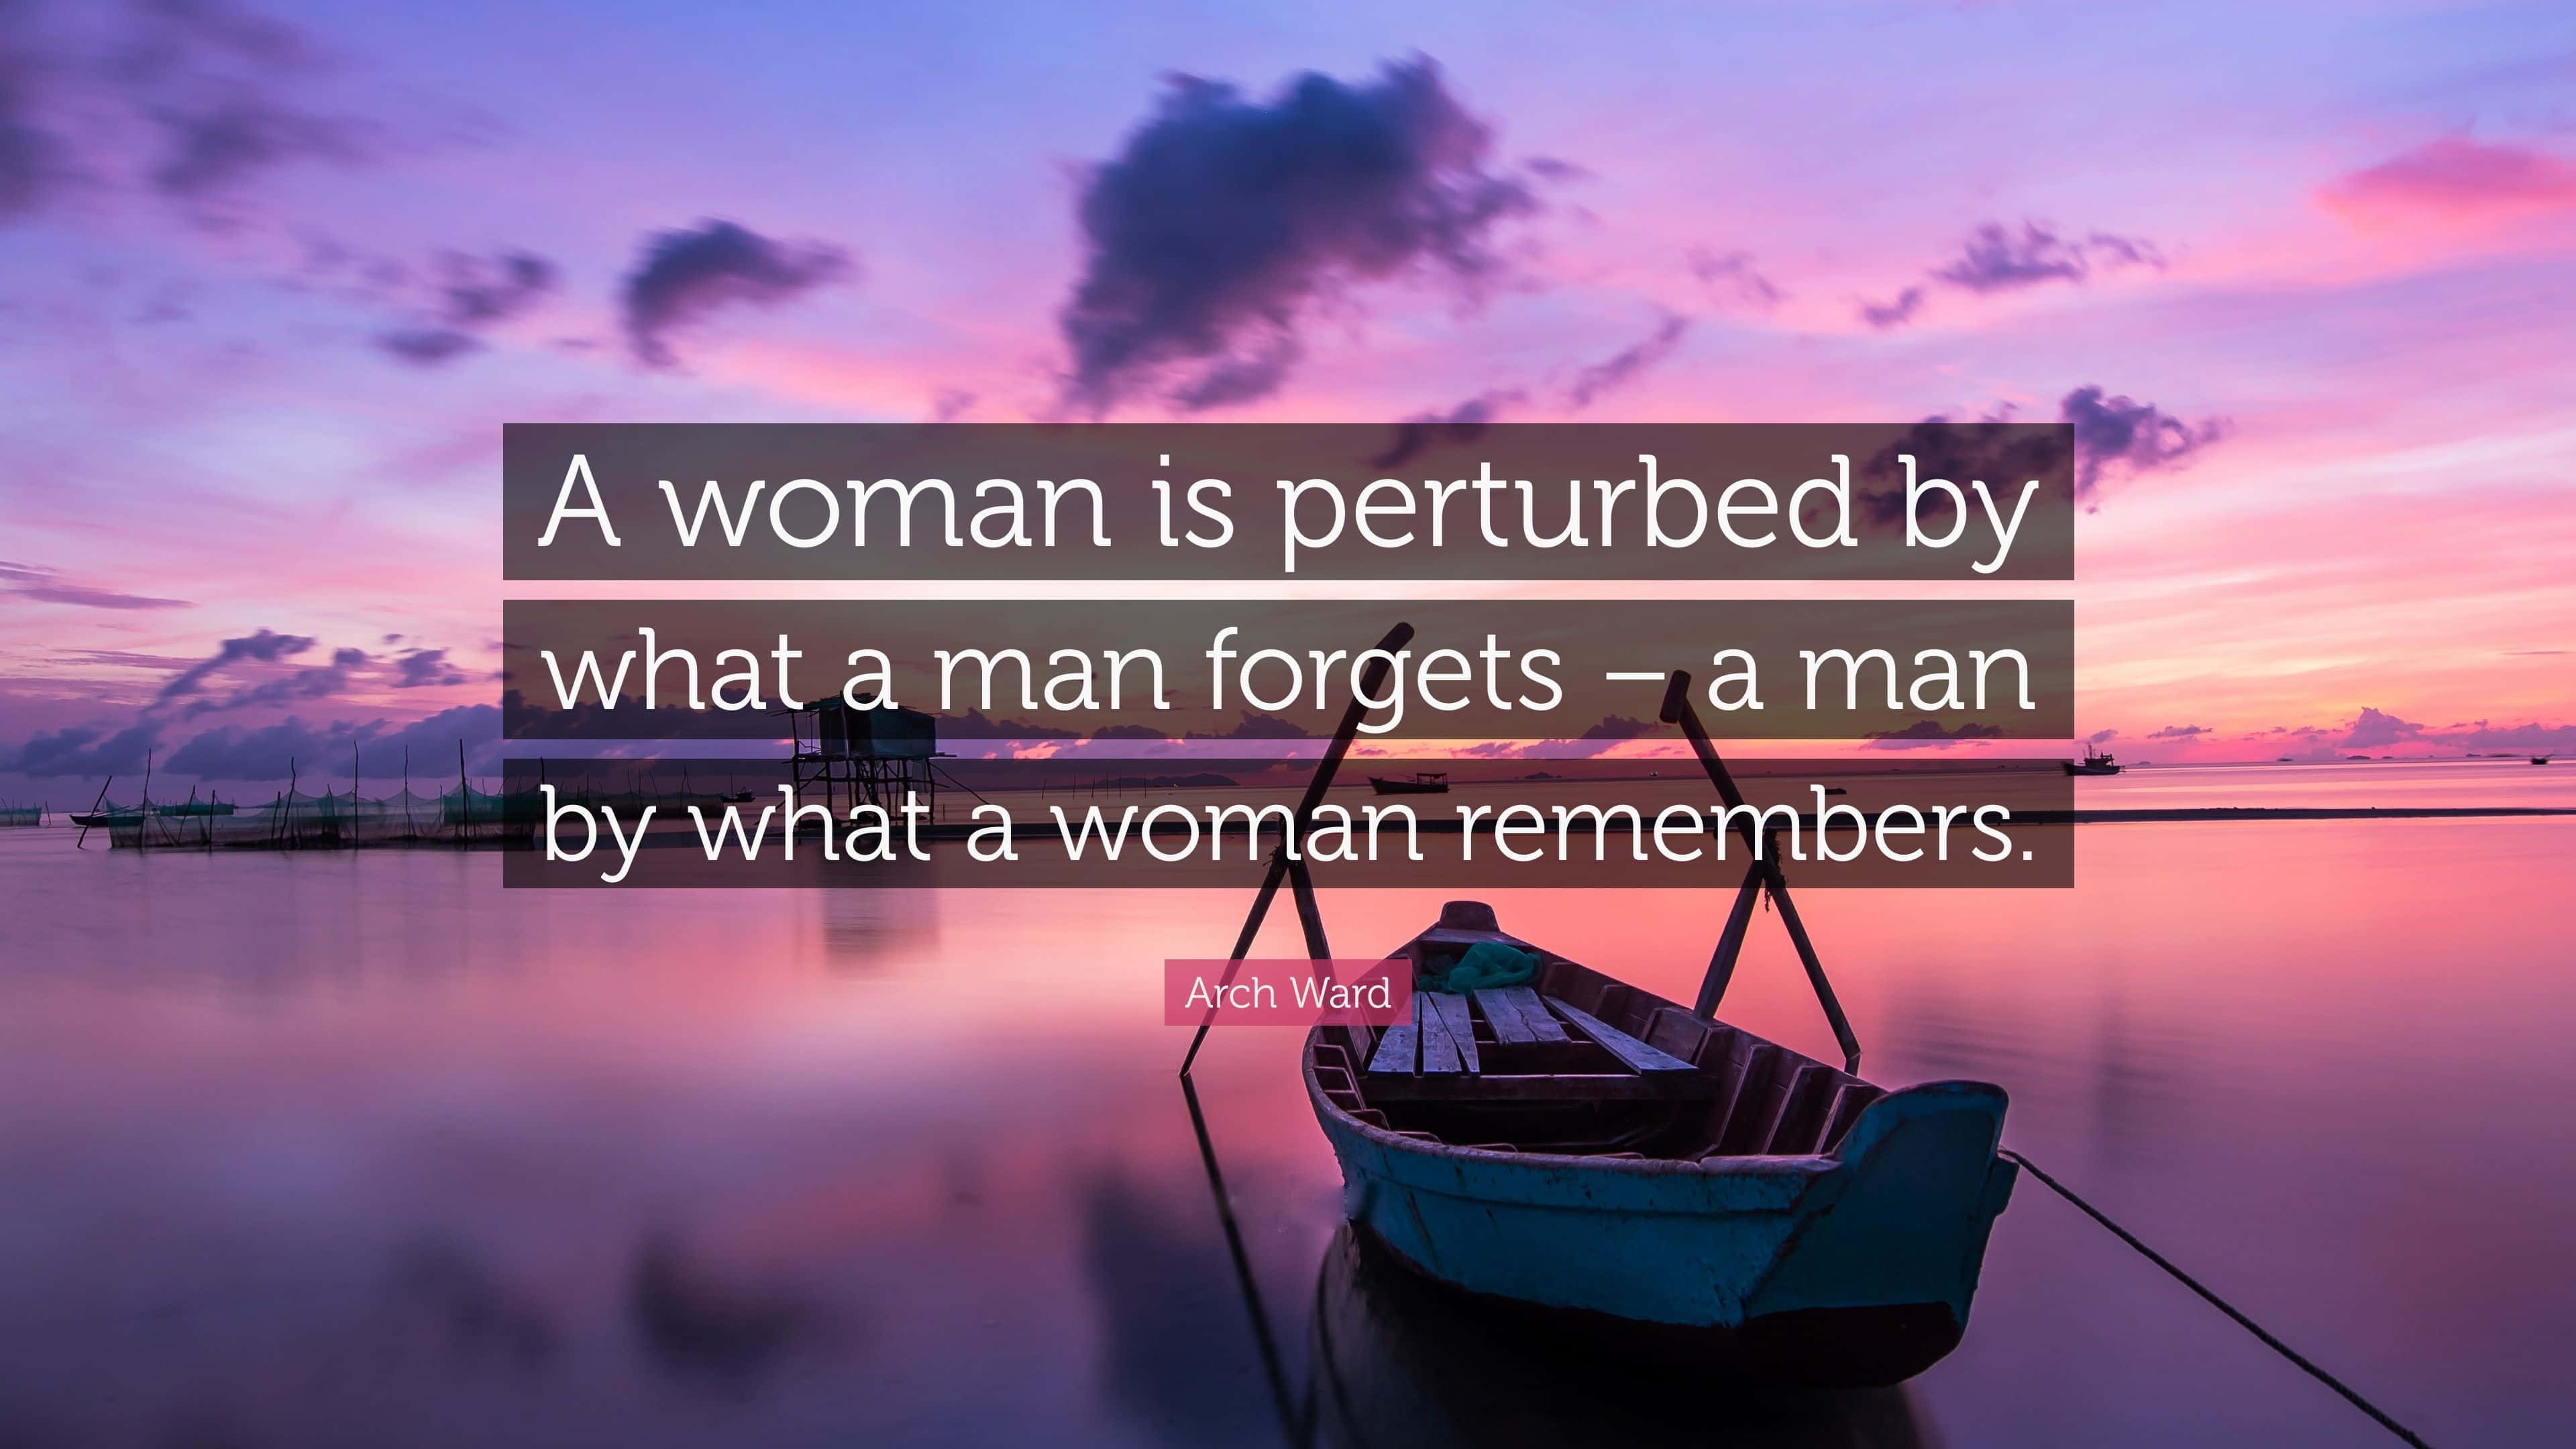 Perturbed Woman Quote Wallpaper